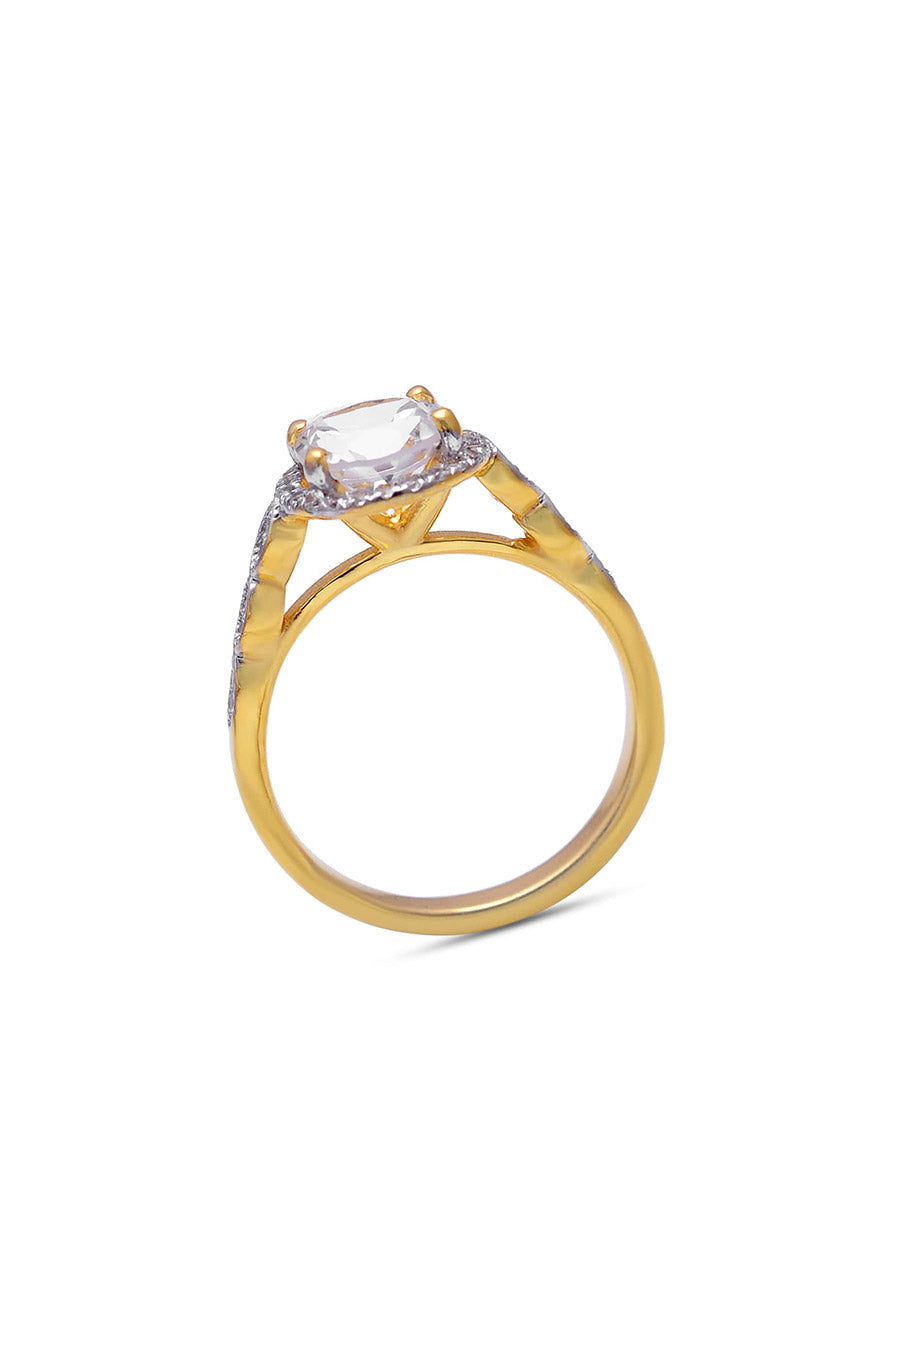 White Topaz Halo Studded Ring in 925 Silver